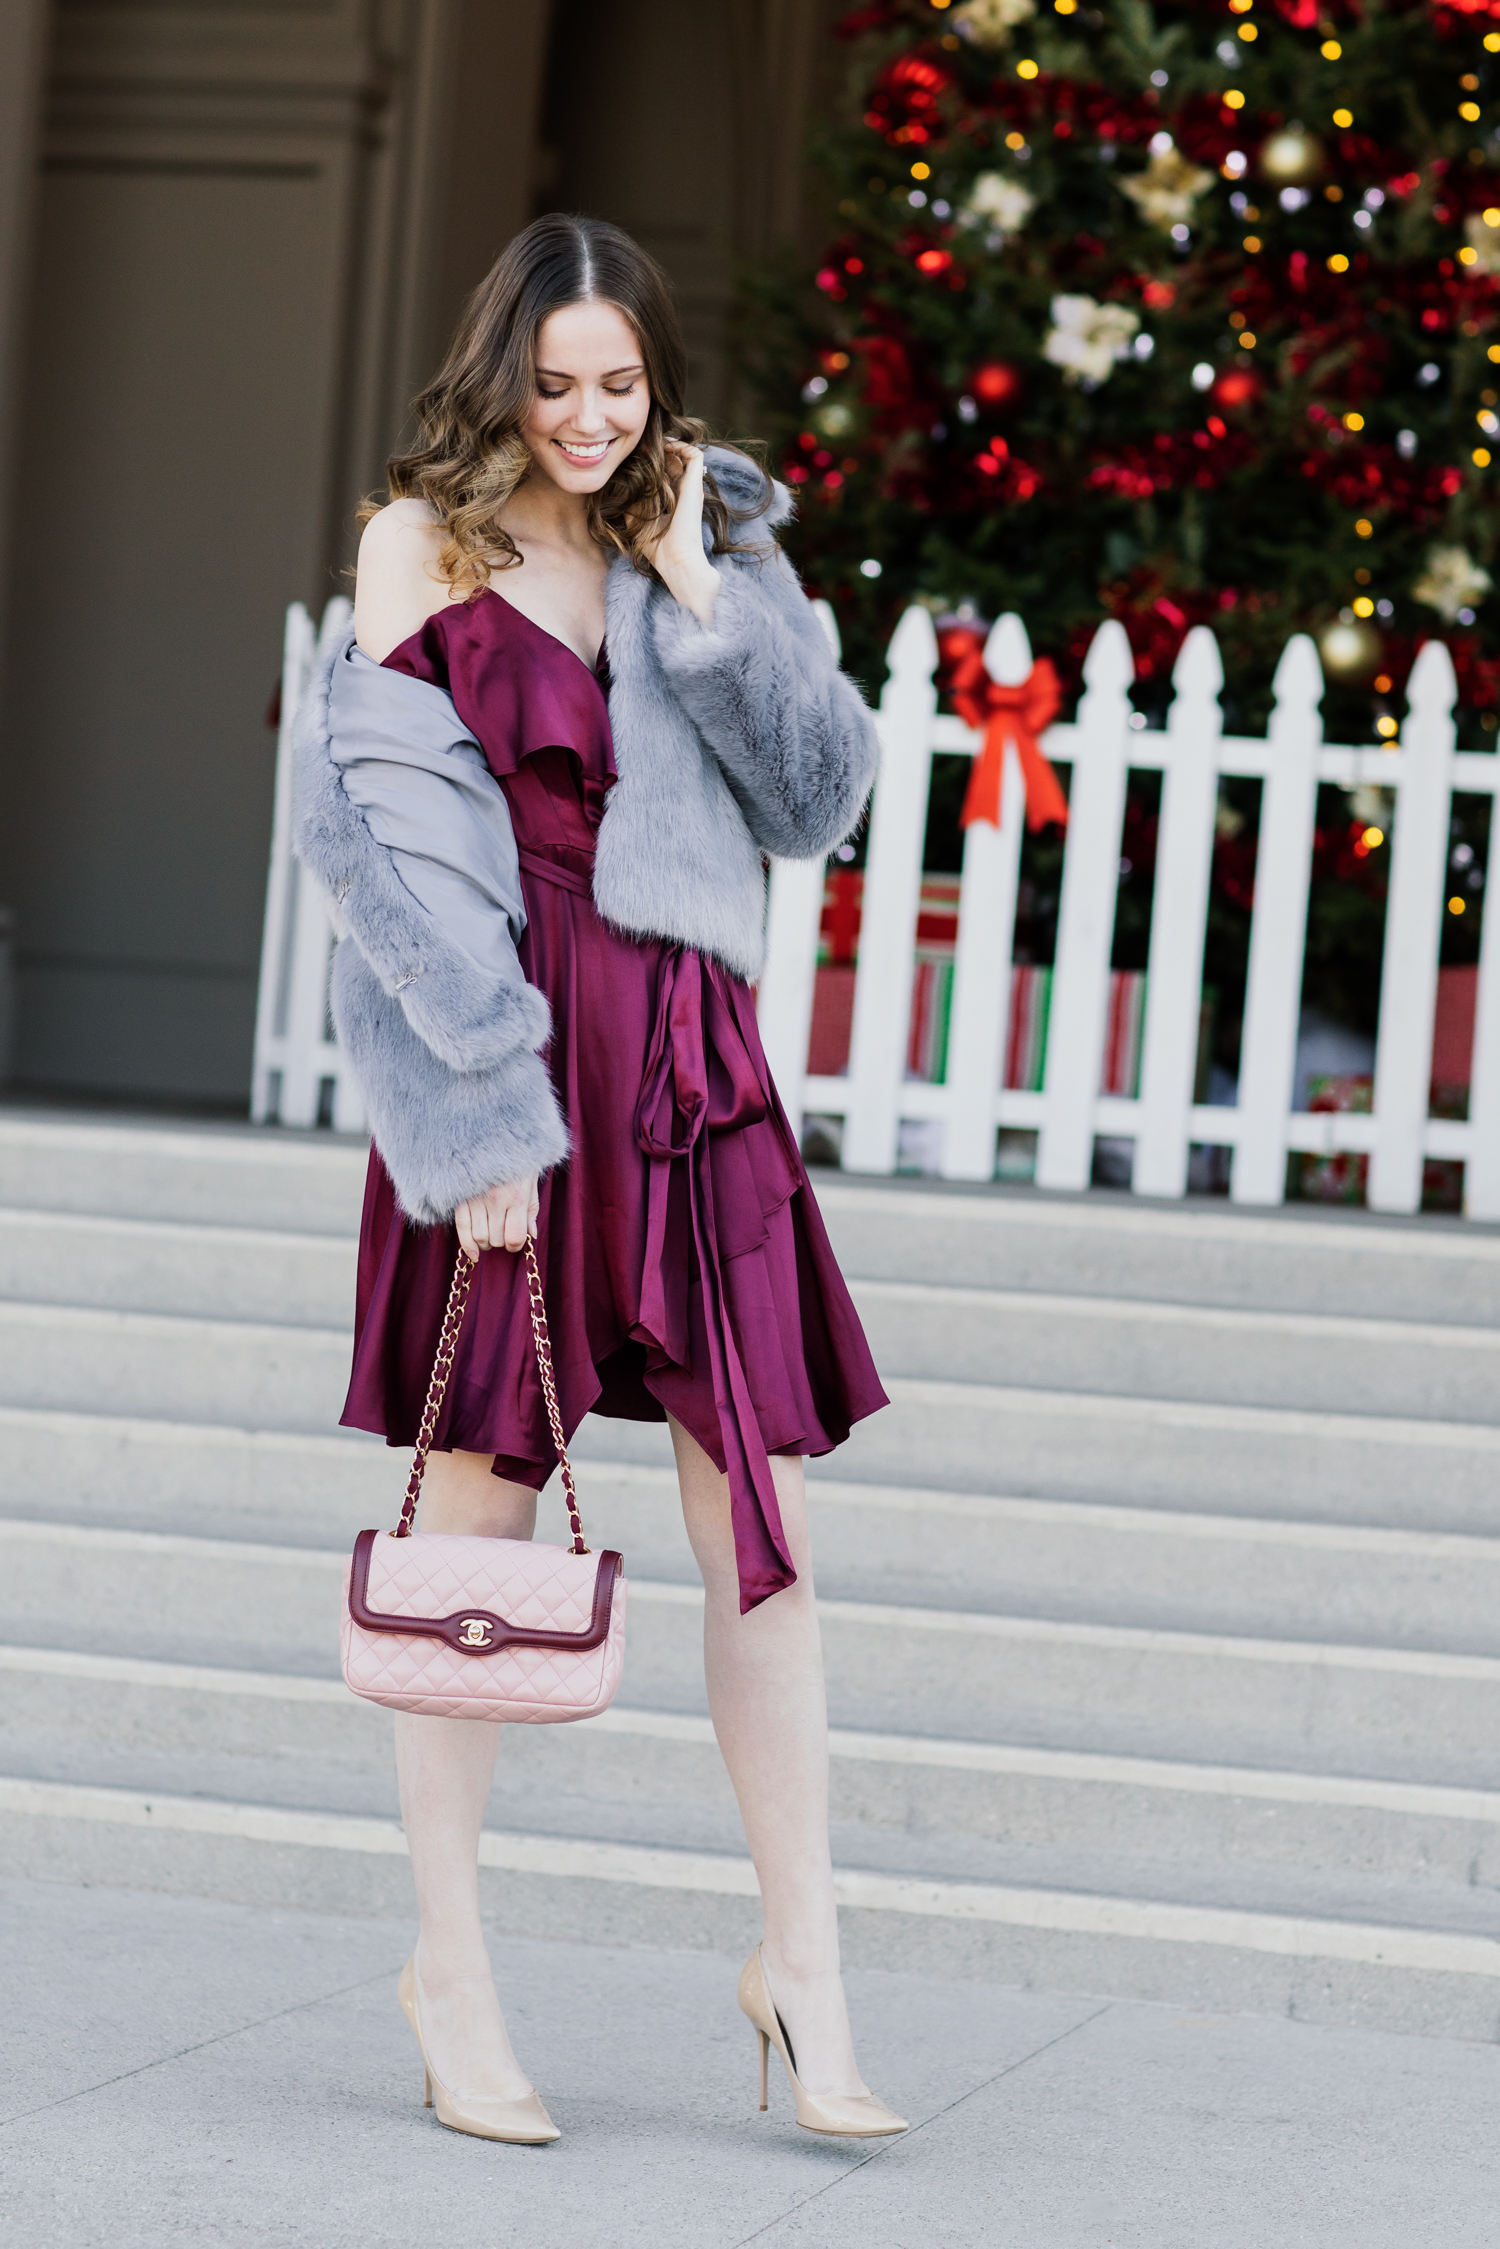 Alyssa Campanella of The A List blog shares her NYE outfit idea wearing Topshop Claire coat and Wayf Rachelle dress